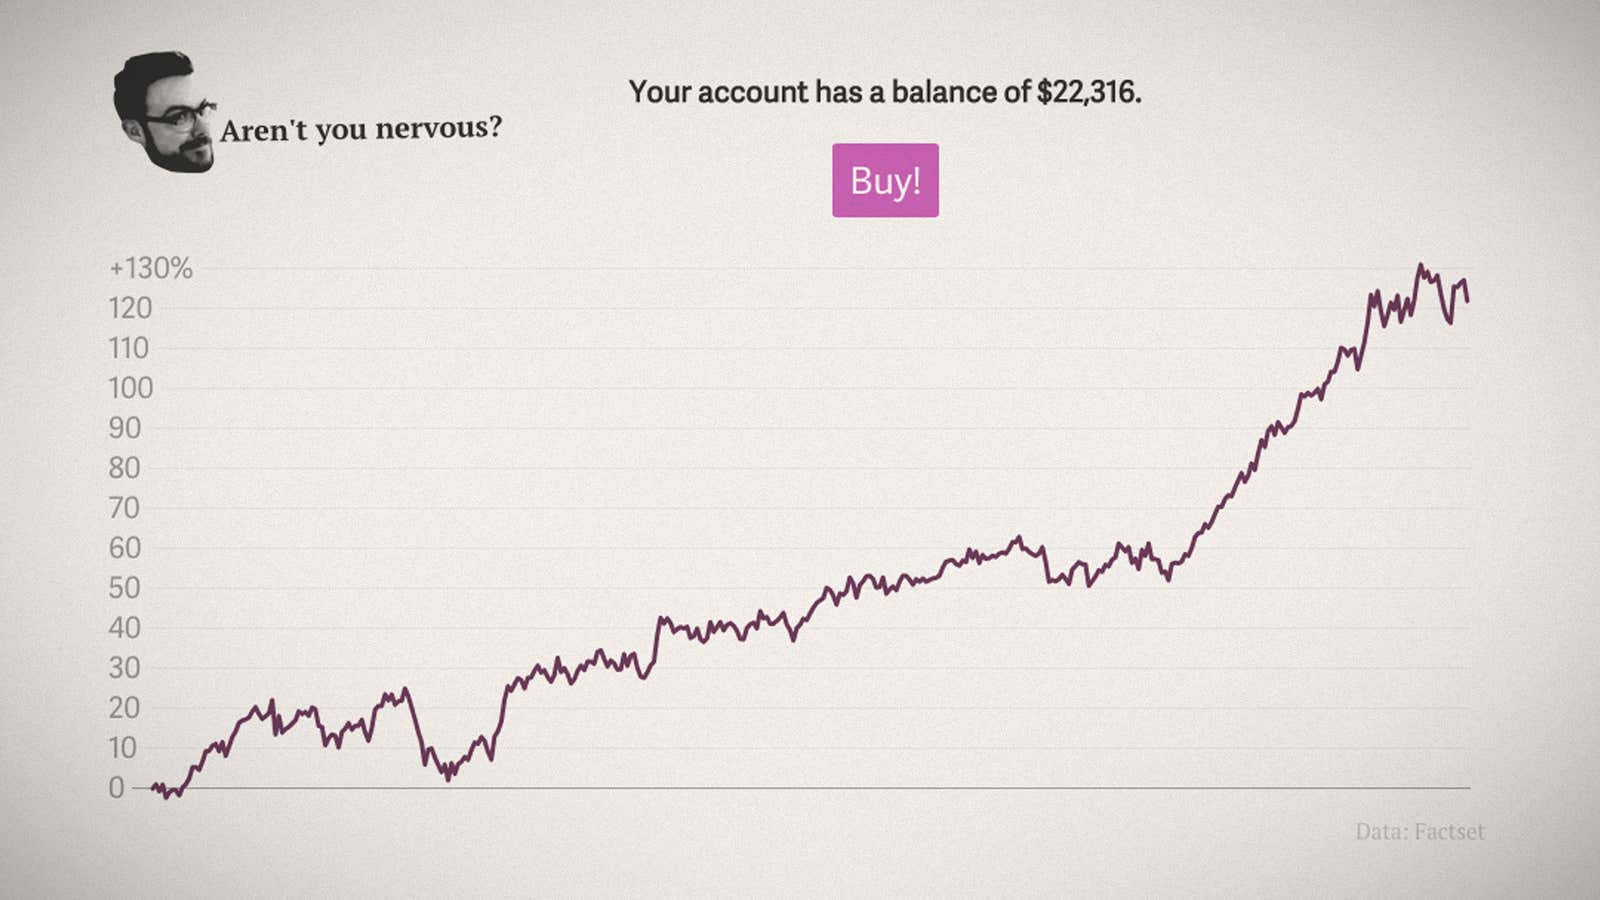 This game will show you just how foolish it is to sell stocks right now